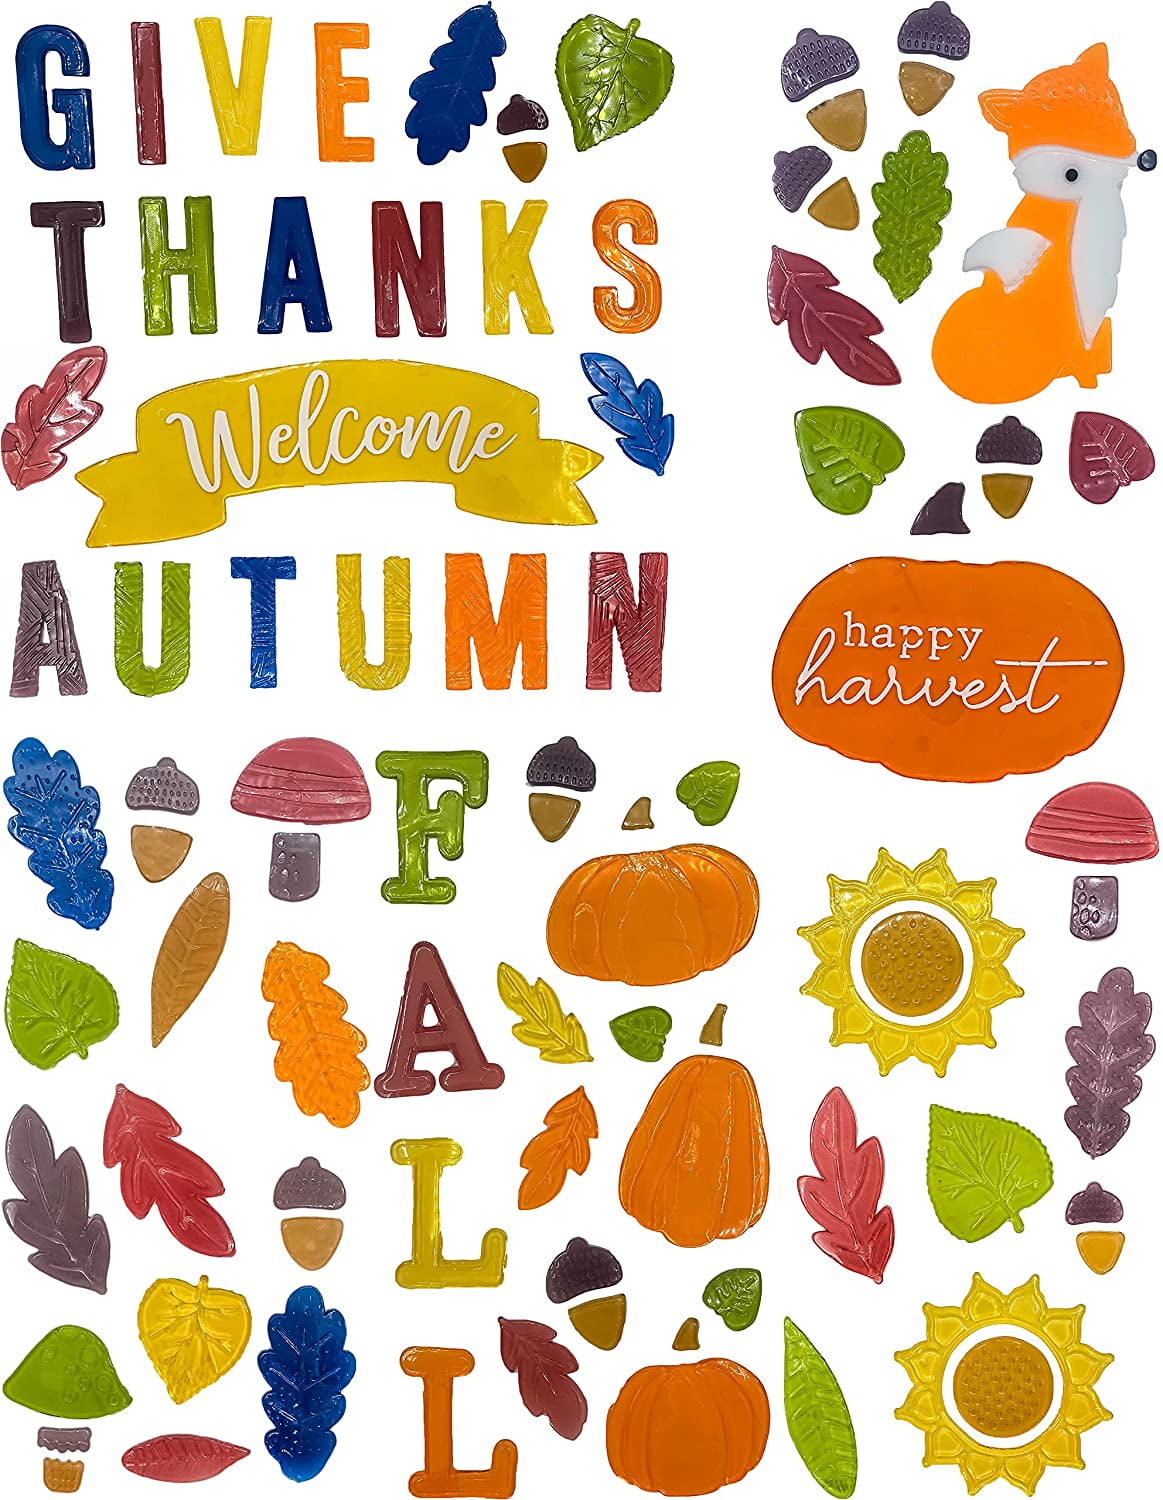 Details about   Thanksgiving Fall Christmas Gel Sticker Window Clings Decoration Decor Harvest 